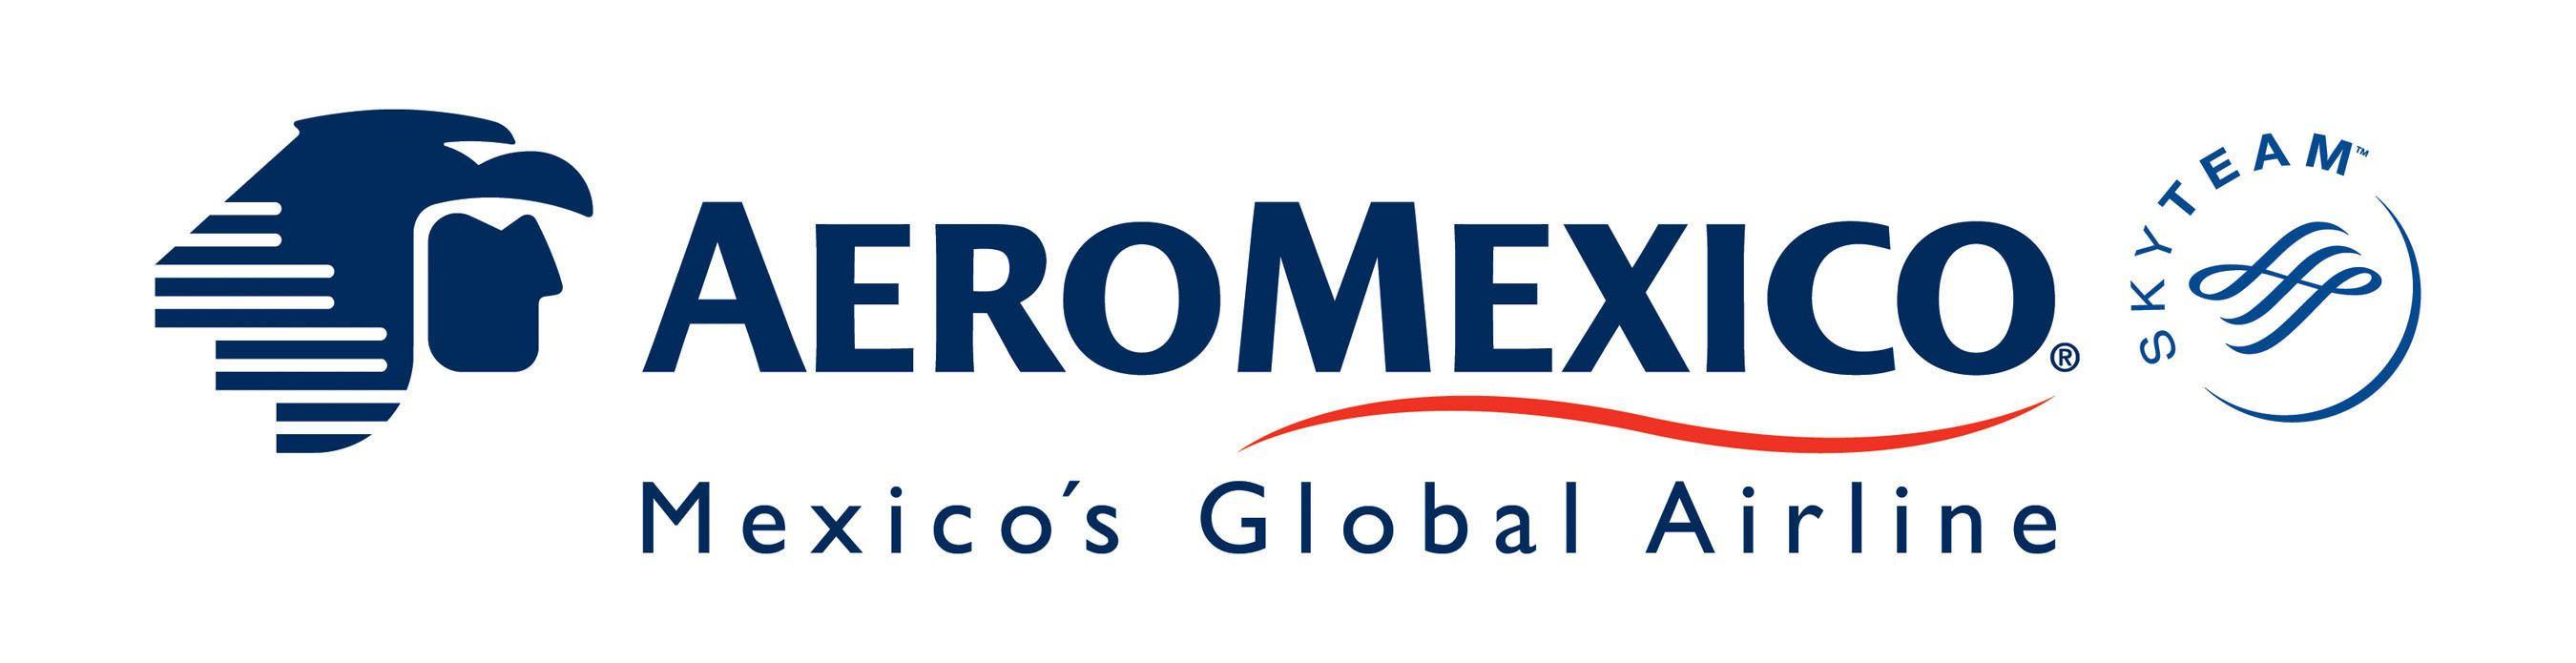 Leading Airline Logo - Aeromexico Takes the Title of 